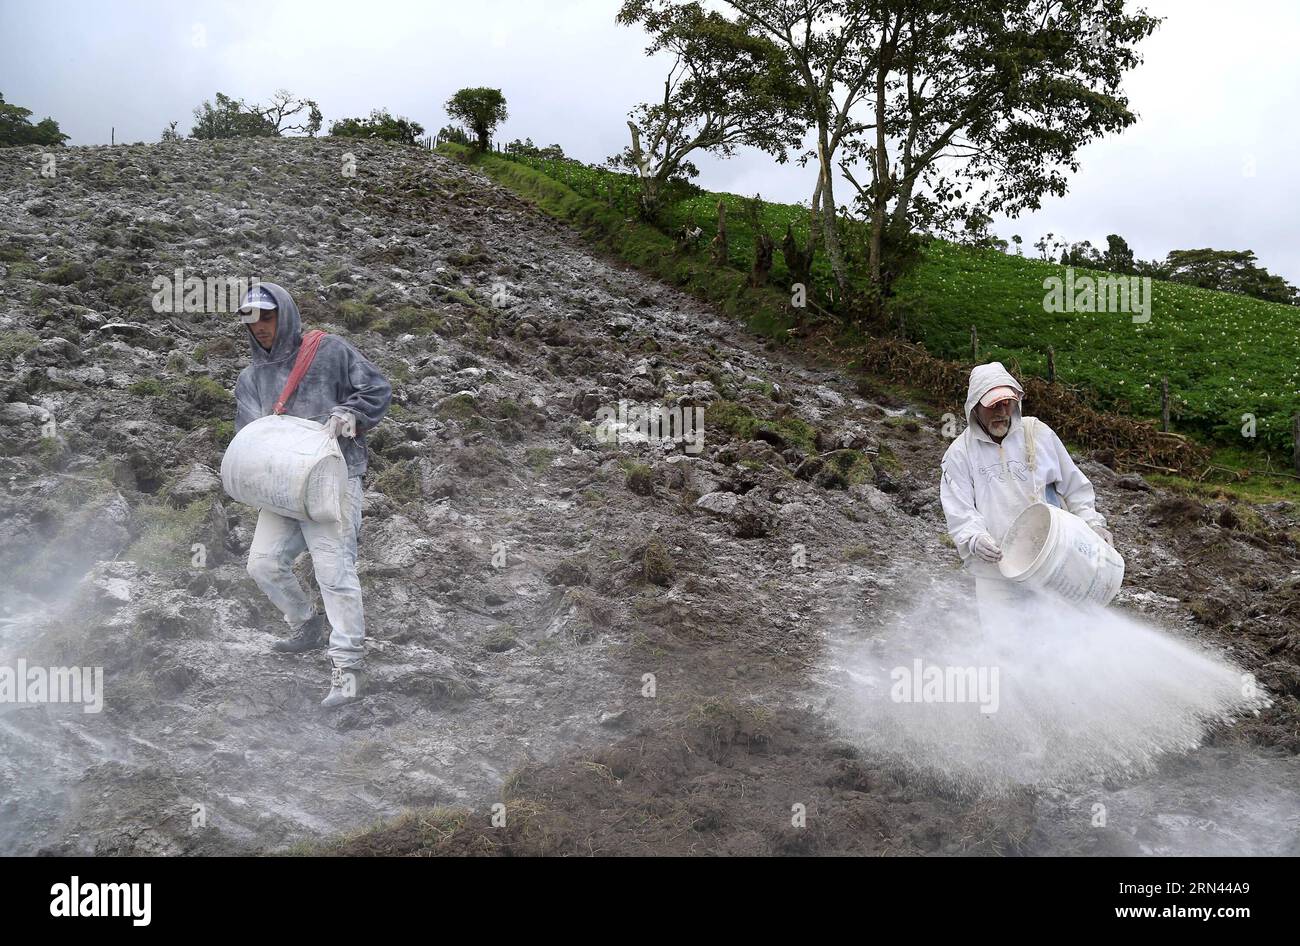 PACAYAS DE CARTAGO, May 5, 2015 -- Workers spread lime on the earth near Pacayas de Cartago, Costa Rica, on May 5, 2015. The Turrialba volcano has been active since last October, with continuous exhalations of gas and ashes, which has affected cattlemen and farmers in the solpes of the volcano. Kent Gilbert) (zjy) COSTA RICA-PACAYAS DE CARTAGO-VOLCANO e KENTxGILBERT PUBLICATIONxNOTxINxCHN   de Cartago May 5 2015 Workers spread Lime ON The Earth Near  de Cartago Costa Rica ON May 5 2015 The Turrialba Volcano has been Active Since Load October With continuous  of Gas and ASHES Which has Affected Stock Photo